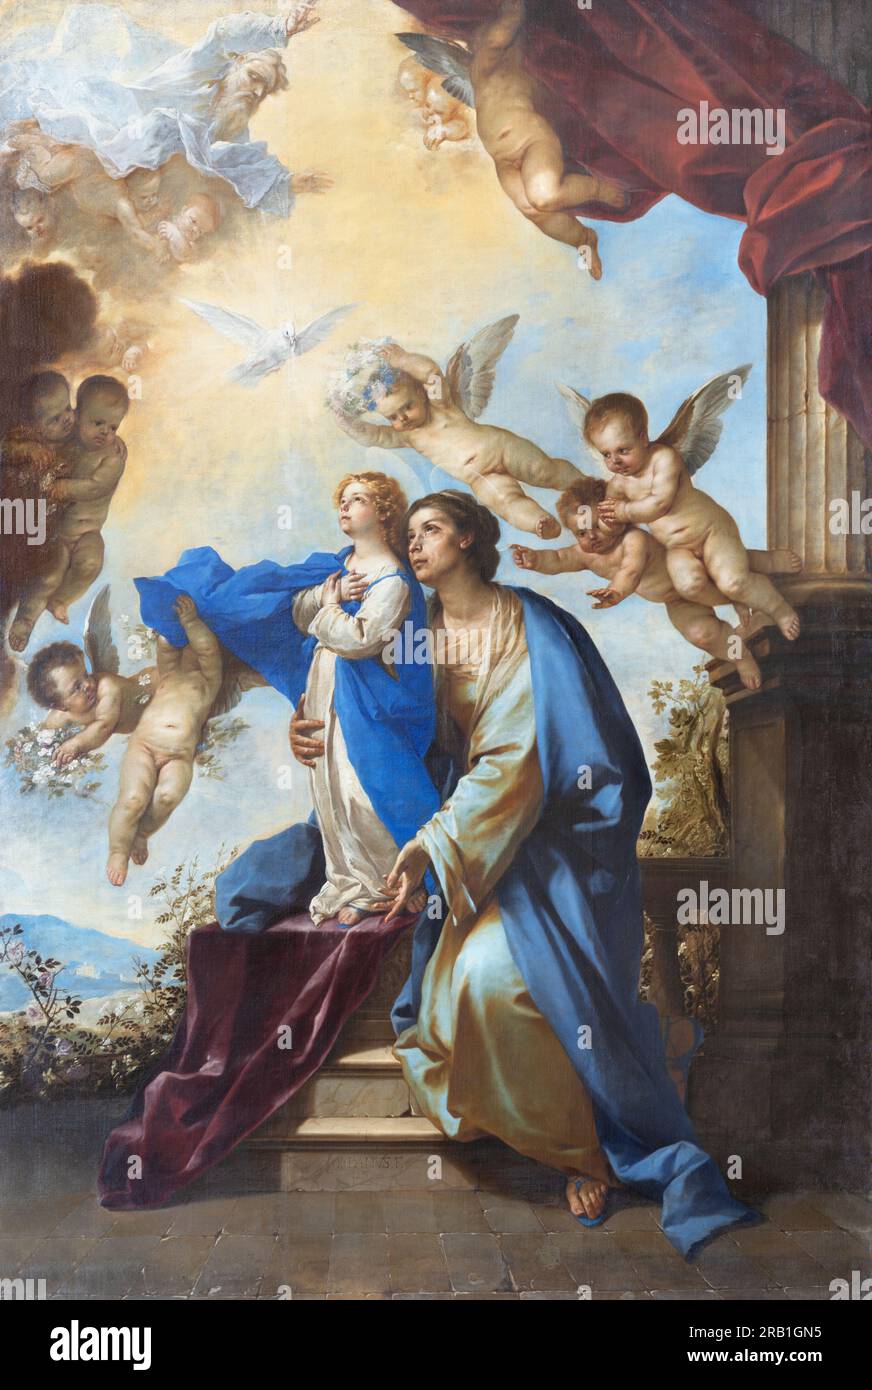 NAPLES, ITALY - APRIL 20, 2023: The painting of St. Ann and Virgin Mary in the church Chiesa dell' Ascensione a Chiaia by Luca Giordano (1657). Stock Photo